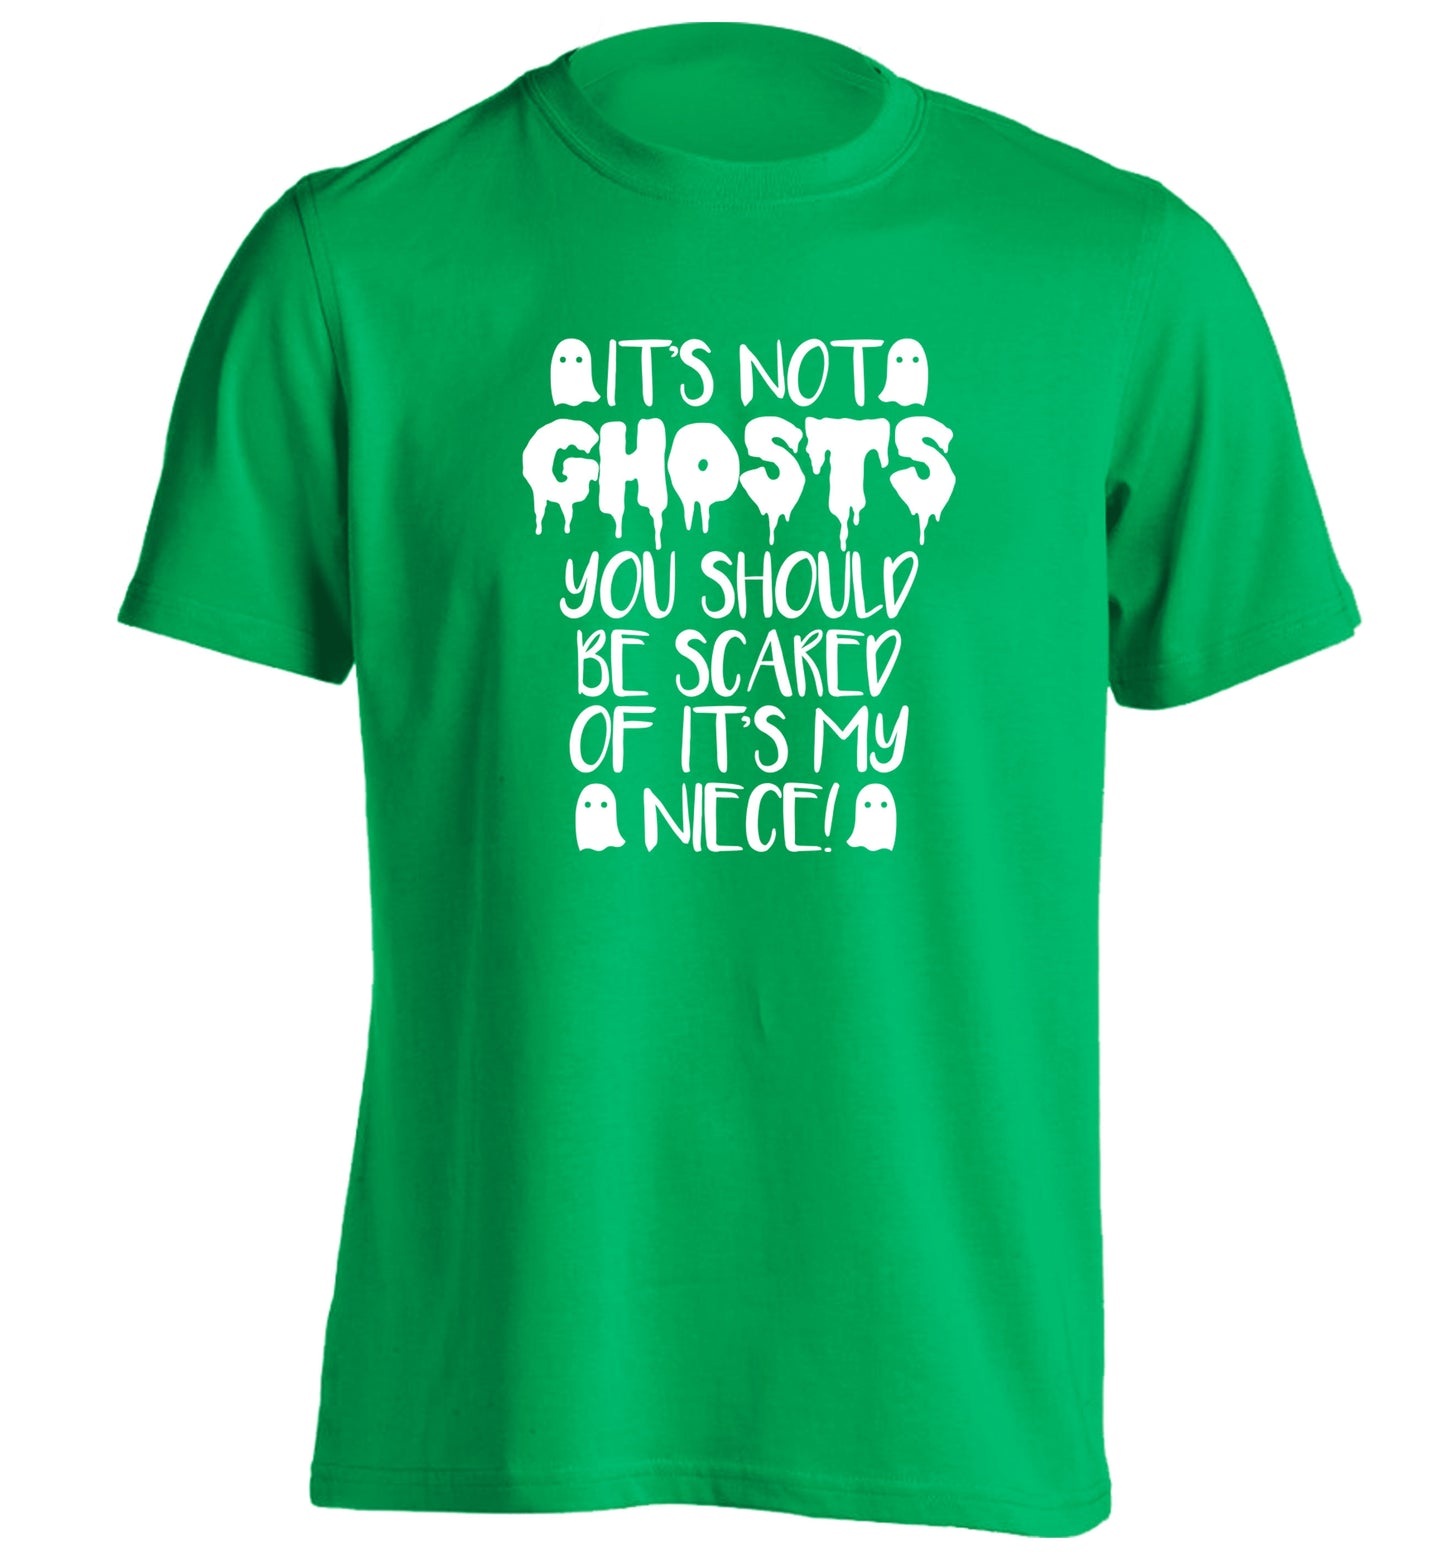 It's not ghosts you should be scared of it's my niece! adults unisex green Tshirt 2XL